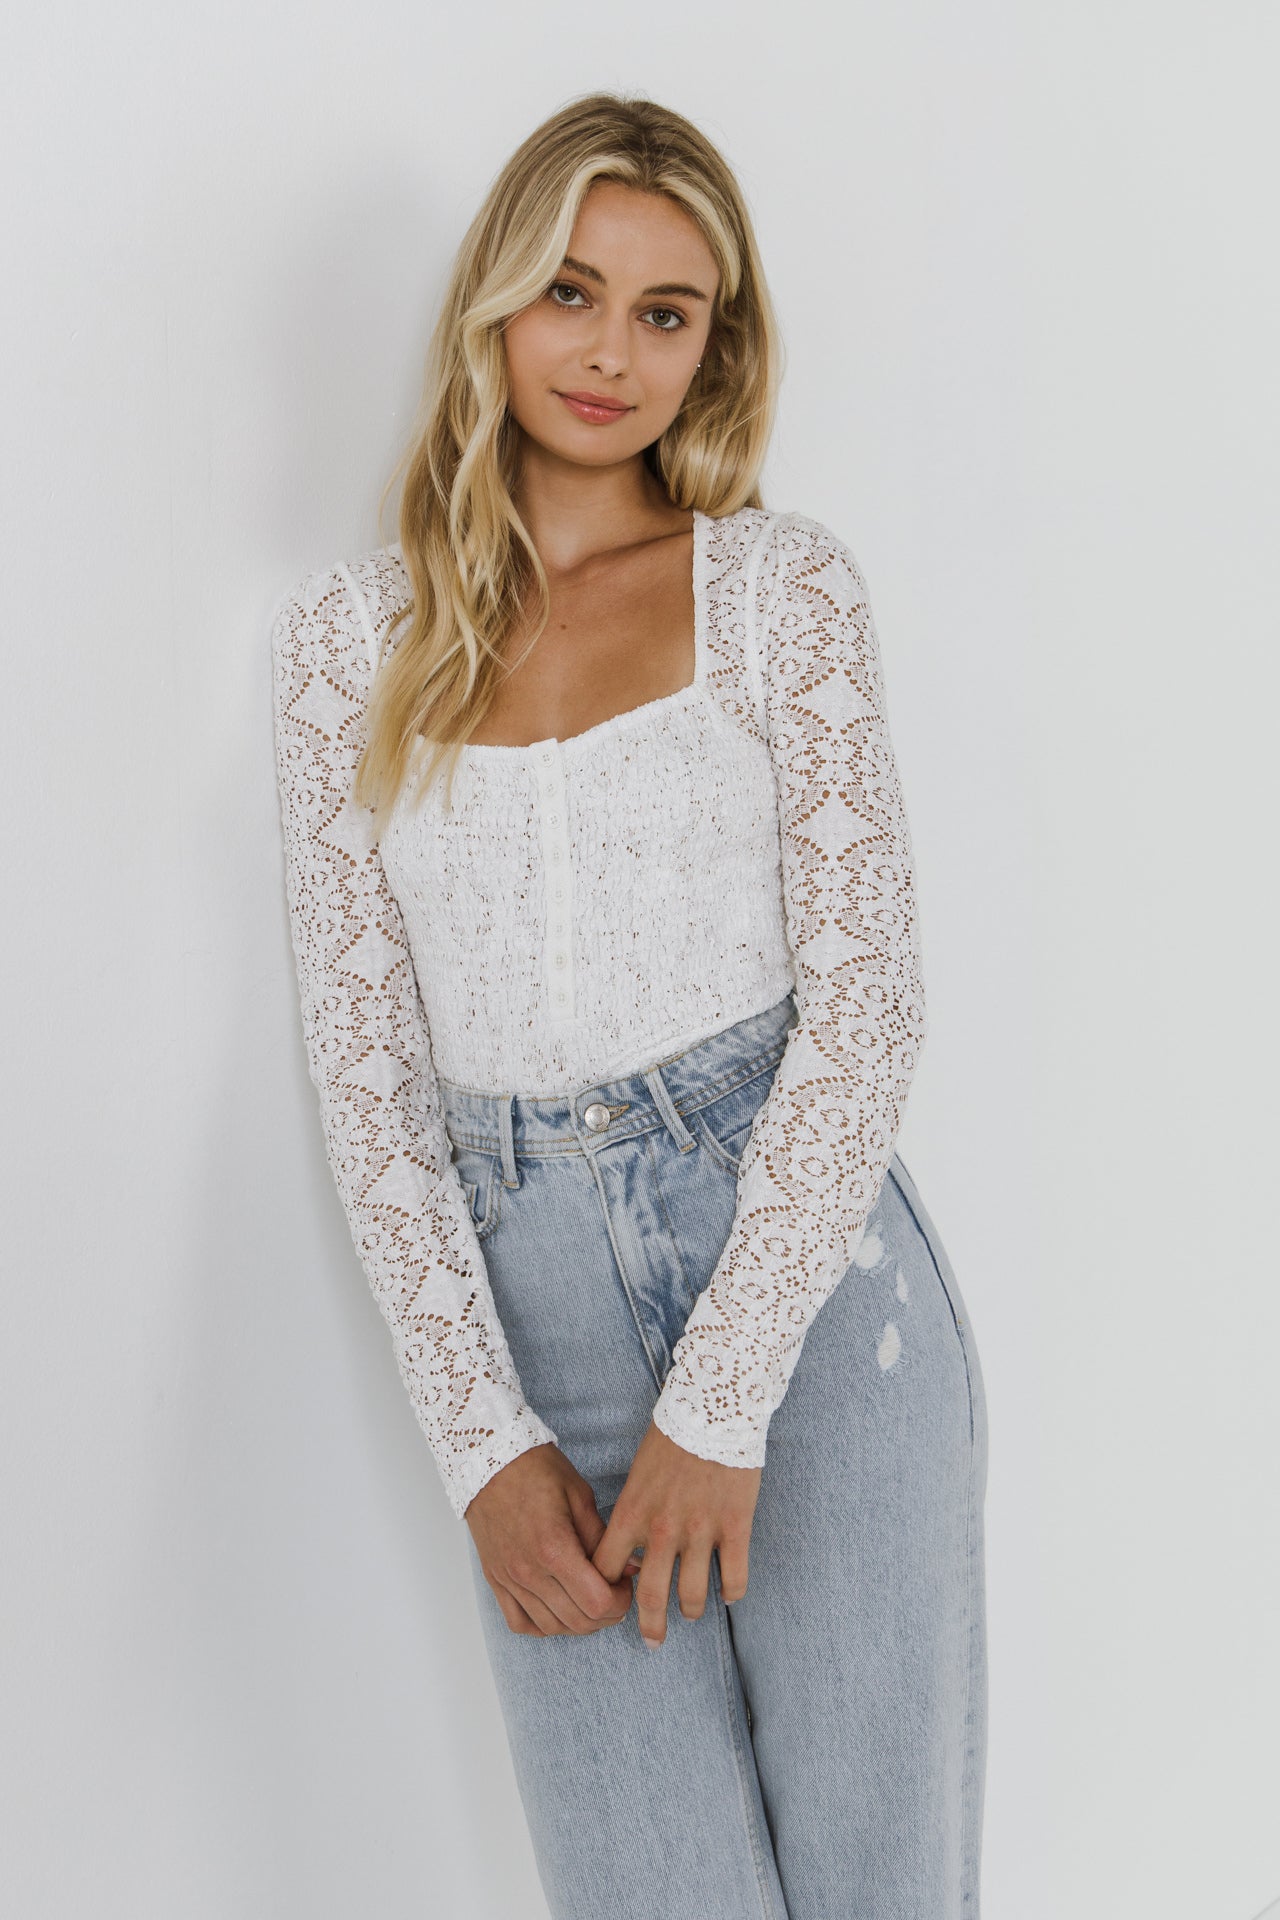 FREE THE ROSES - Lace Long Sleeve Top - TOPS available at Objectrare